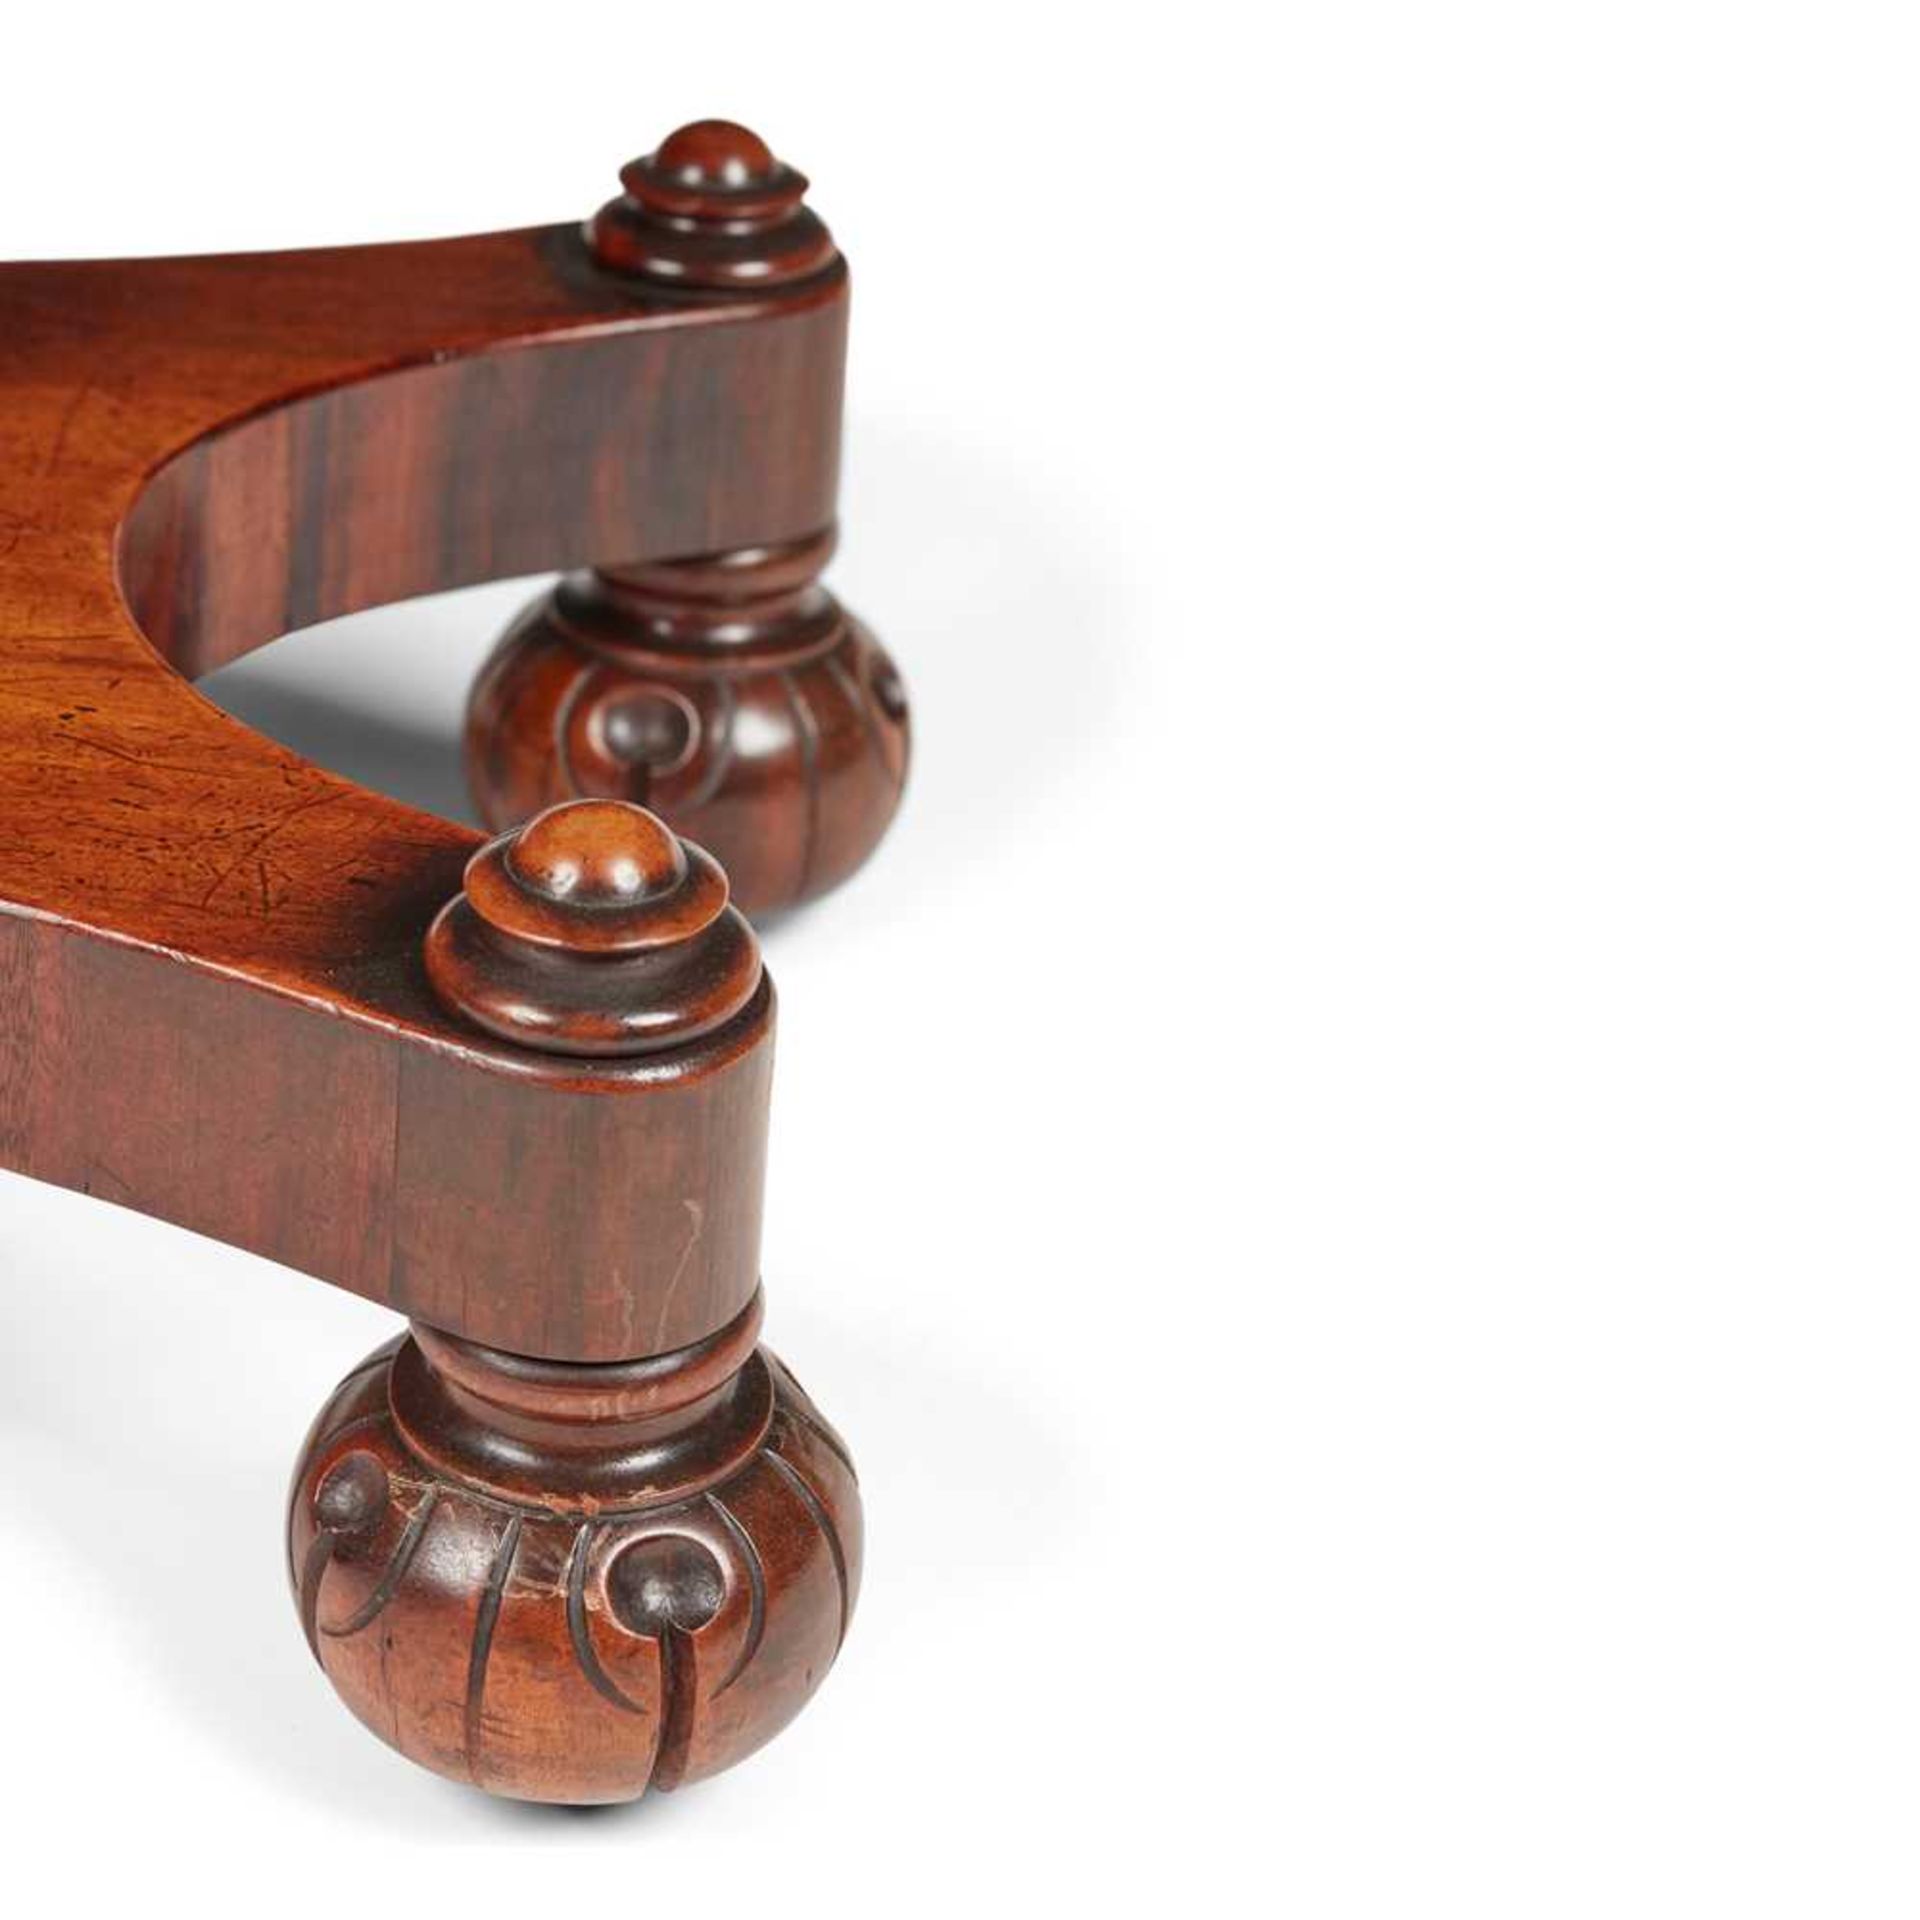 A FINE REGENCY GONCALO ALVES CENTRE TABLE, ATTRIBUTED TO JAMES MEIN OF KELSO EARLY 19TH CENTURY - Image 4 of 5